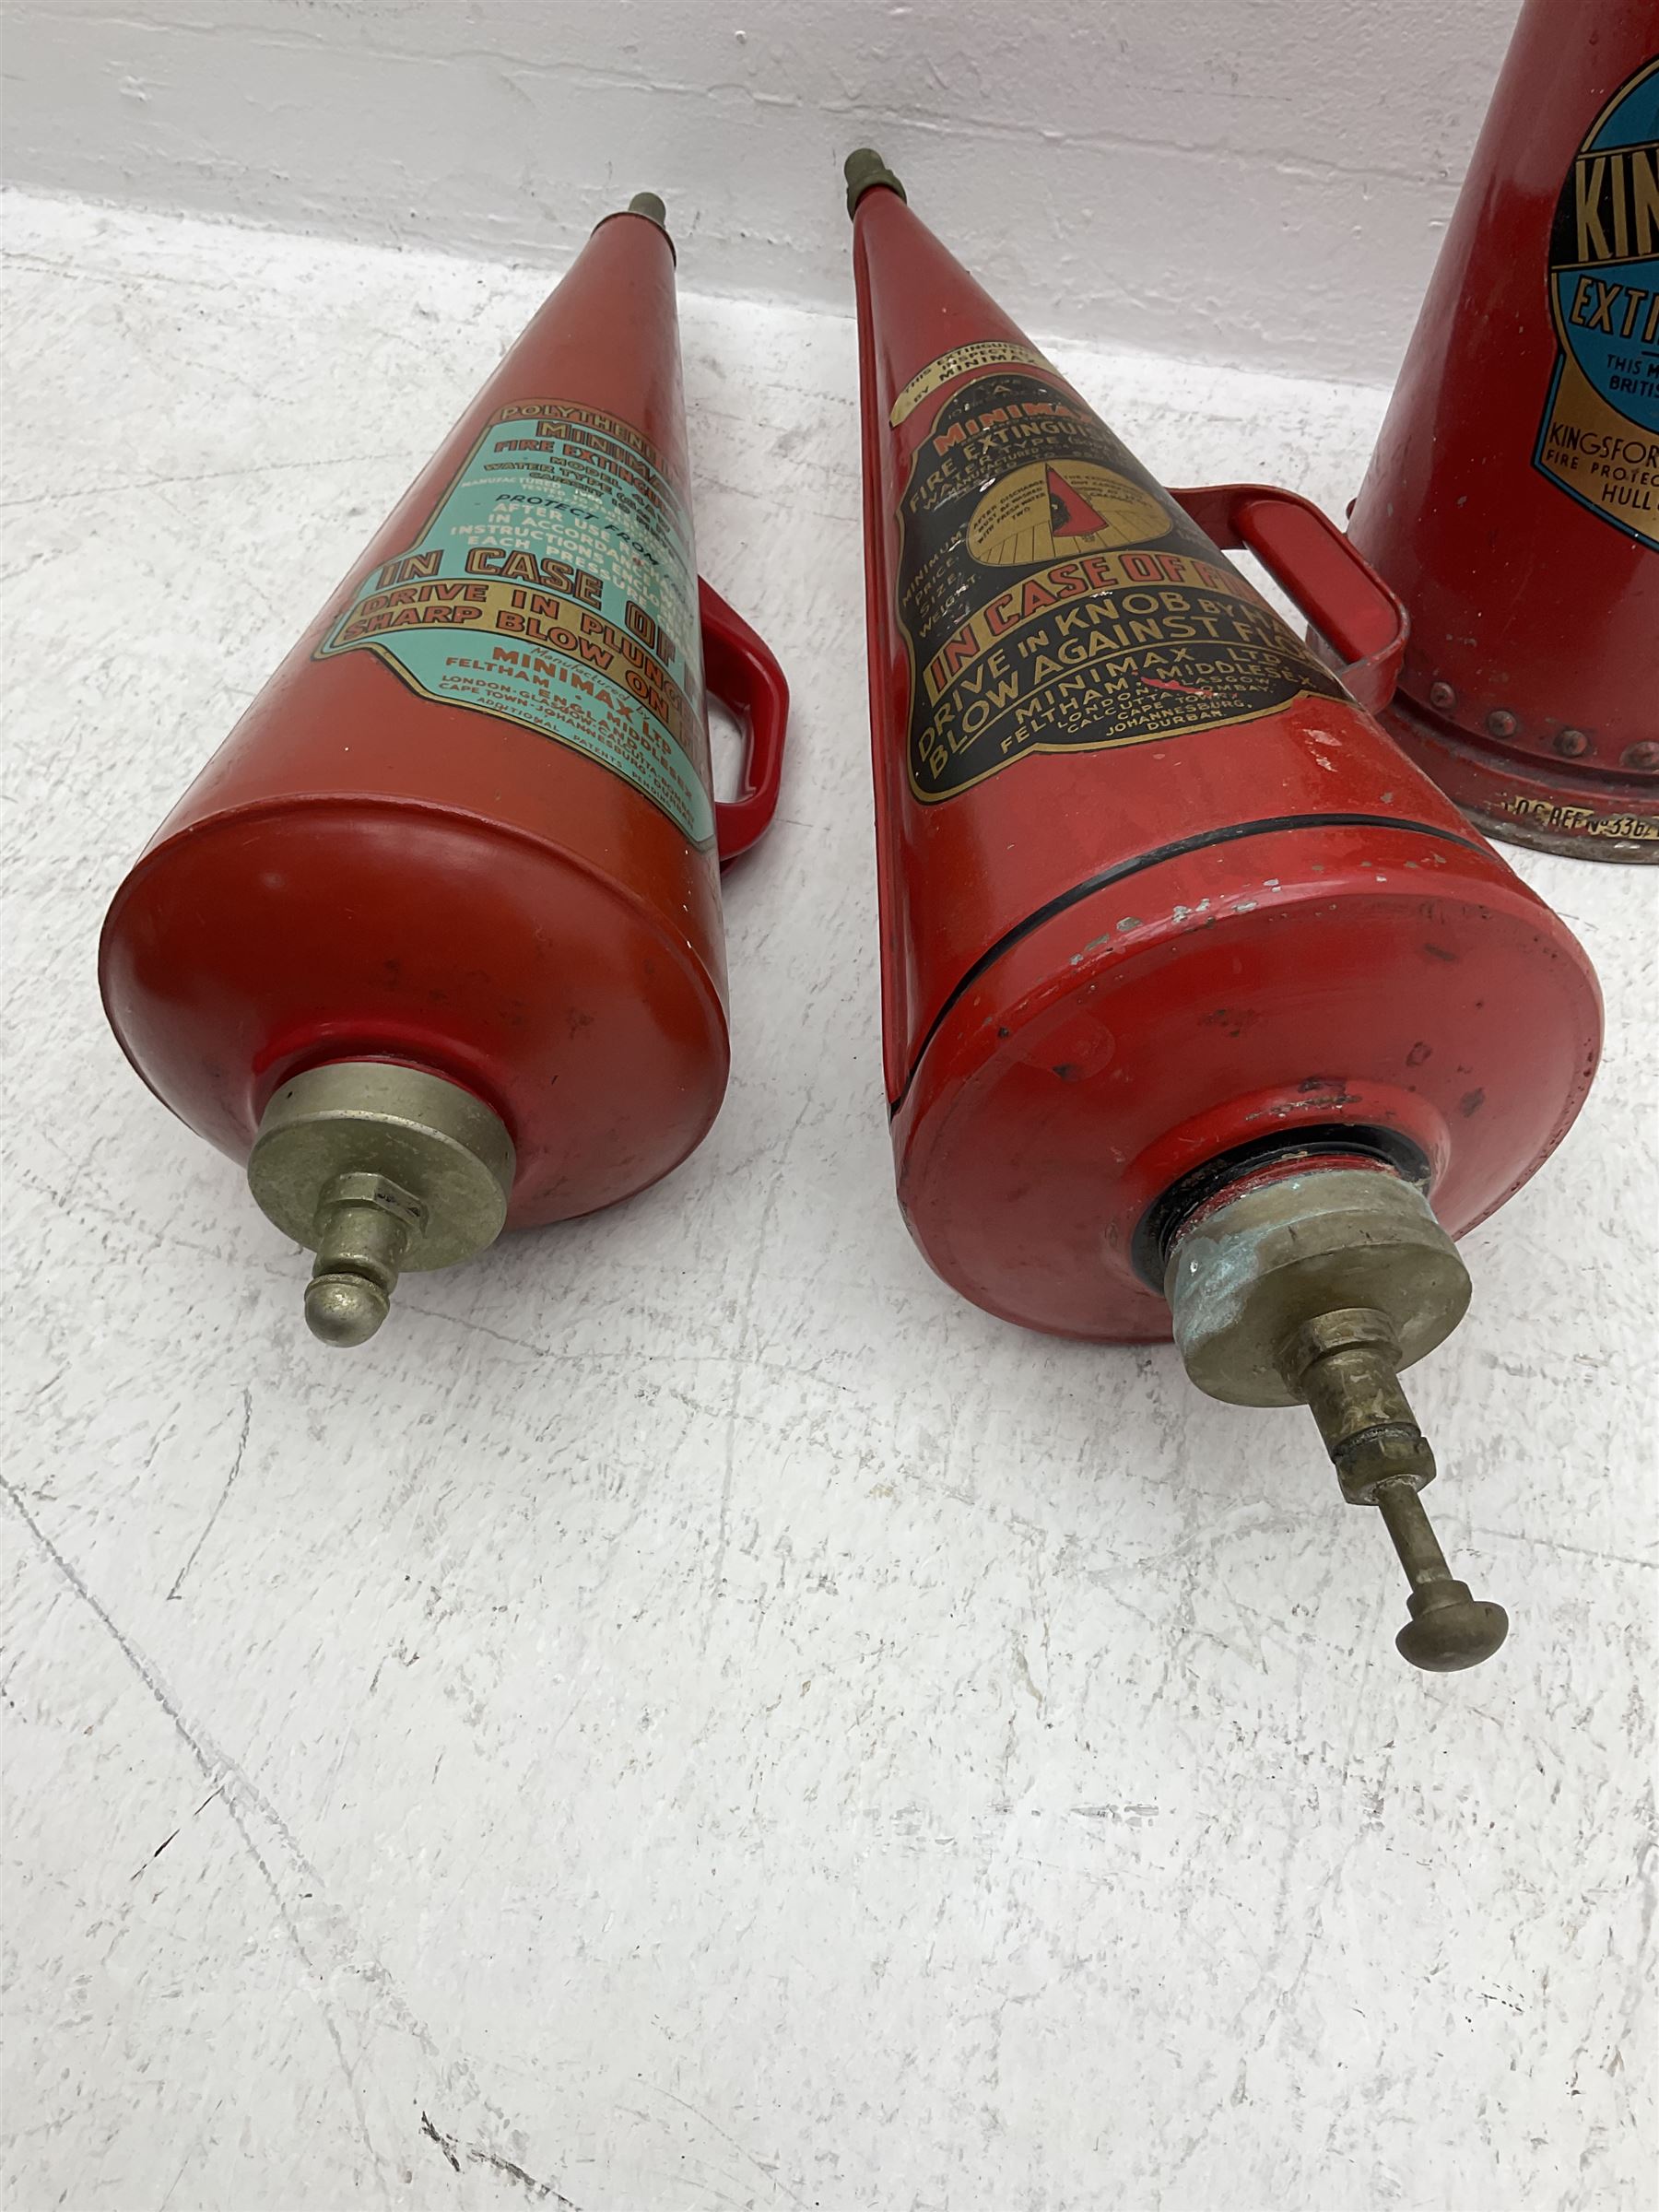 Kingsford fire extinguisher of riveted conical form, dated 1965